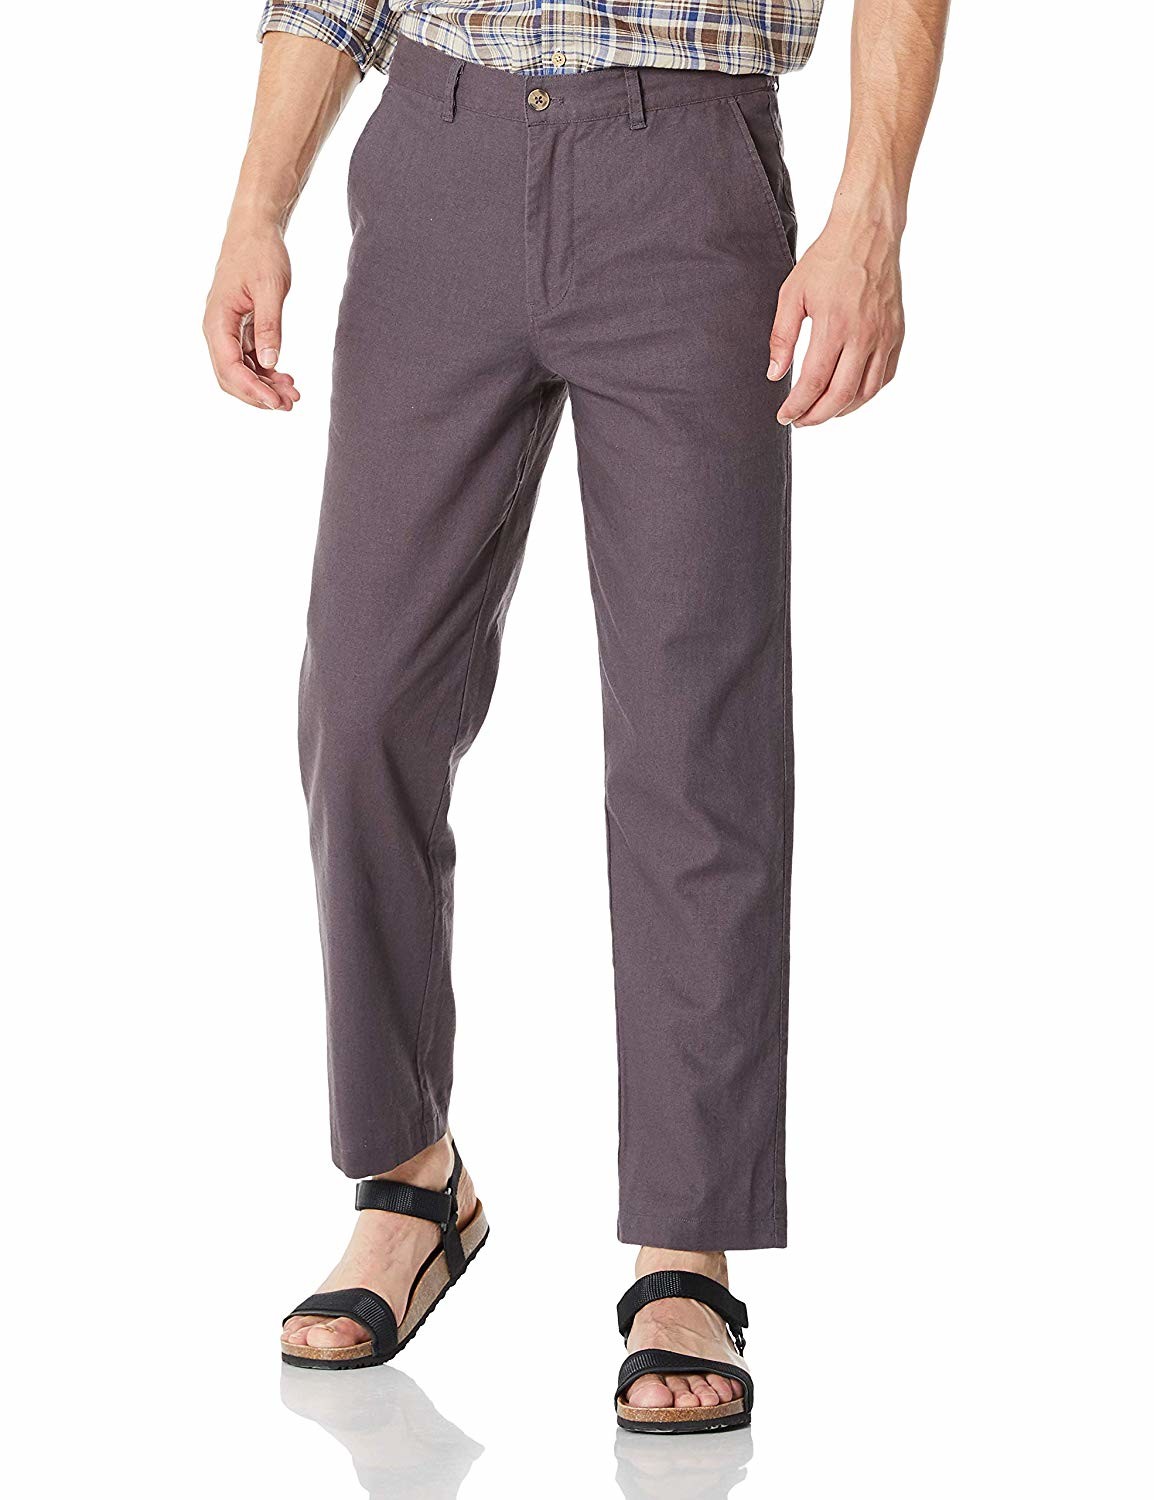 Quality size 40 42 44 Men'S Summer Plain Casual Cotton And Linen Cropped Trousers mid rise for sale